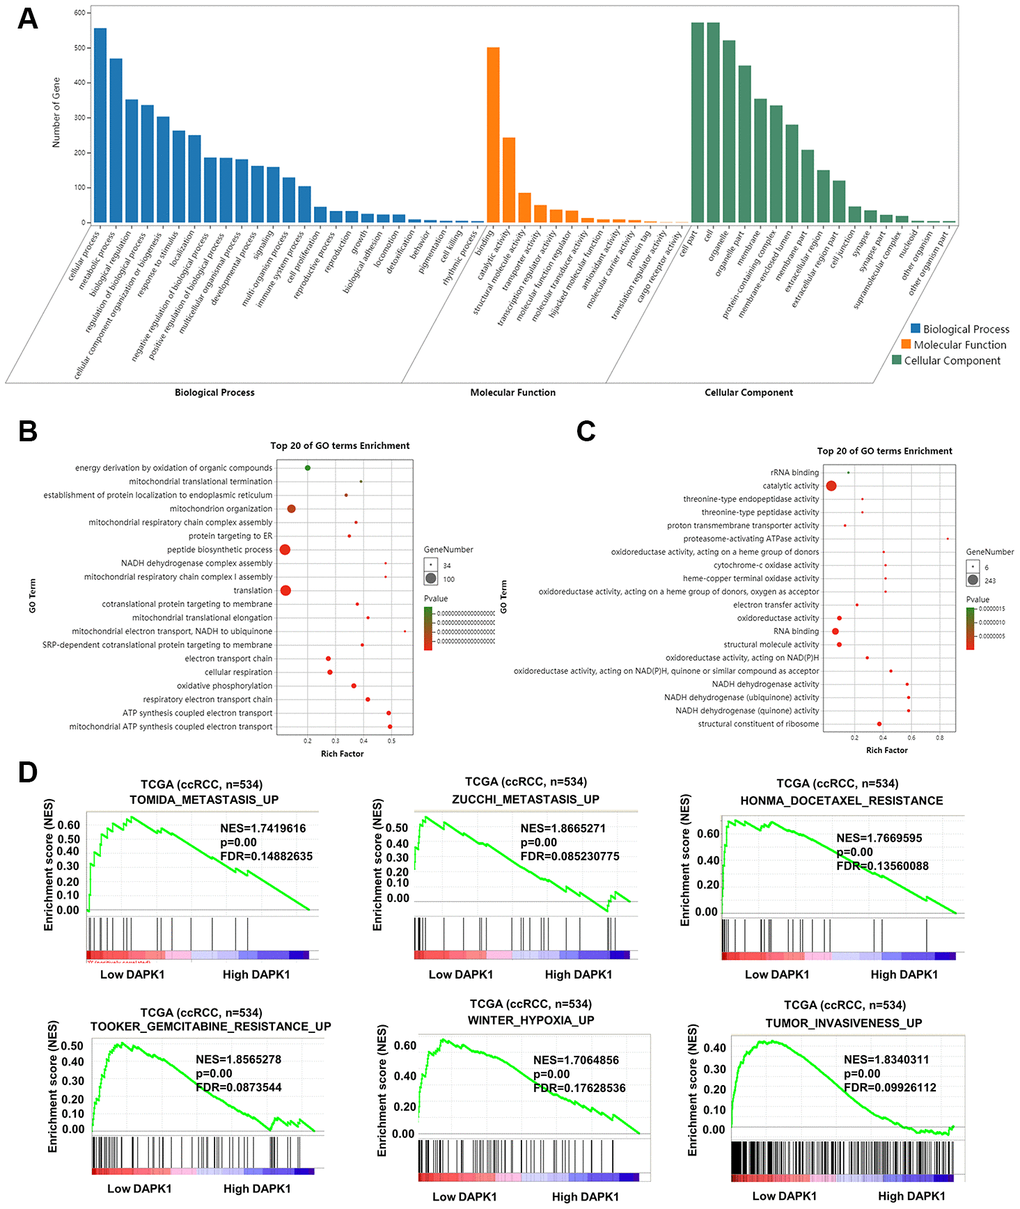 Functional enrichment analysis of genes related to DAPK1 in ccRCC tissues. (A–C) GO enrichment analysis shows the biological processes, molecular functions and cellular components that represent genes that negatively correlate with DAPK1 expression based on the transcriptome analysis of the TCGA-KIRC dataset. (D) GSEA show that genes upregulated because of DAPK1 downregulation in ccRCC include those that promote metastasis, drug resistance, hypoxia, and invasiveness. Note: ***p